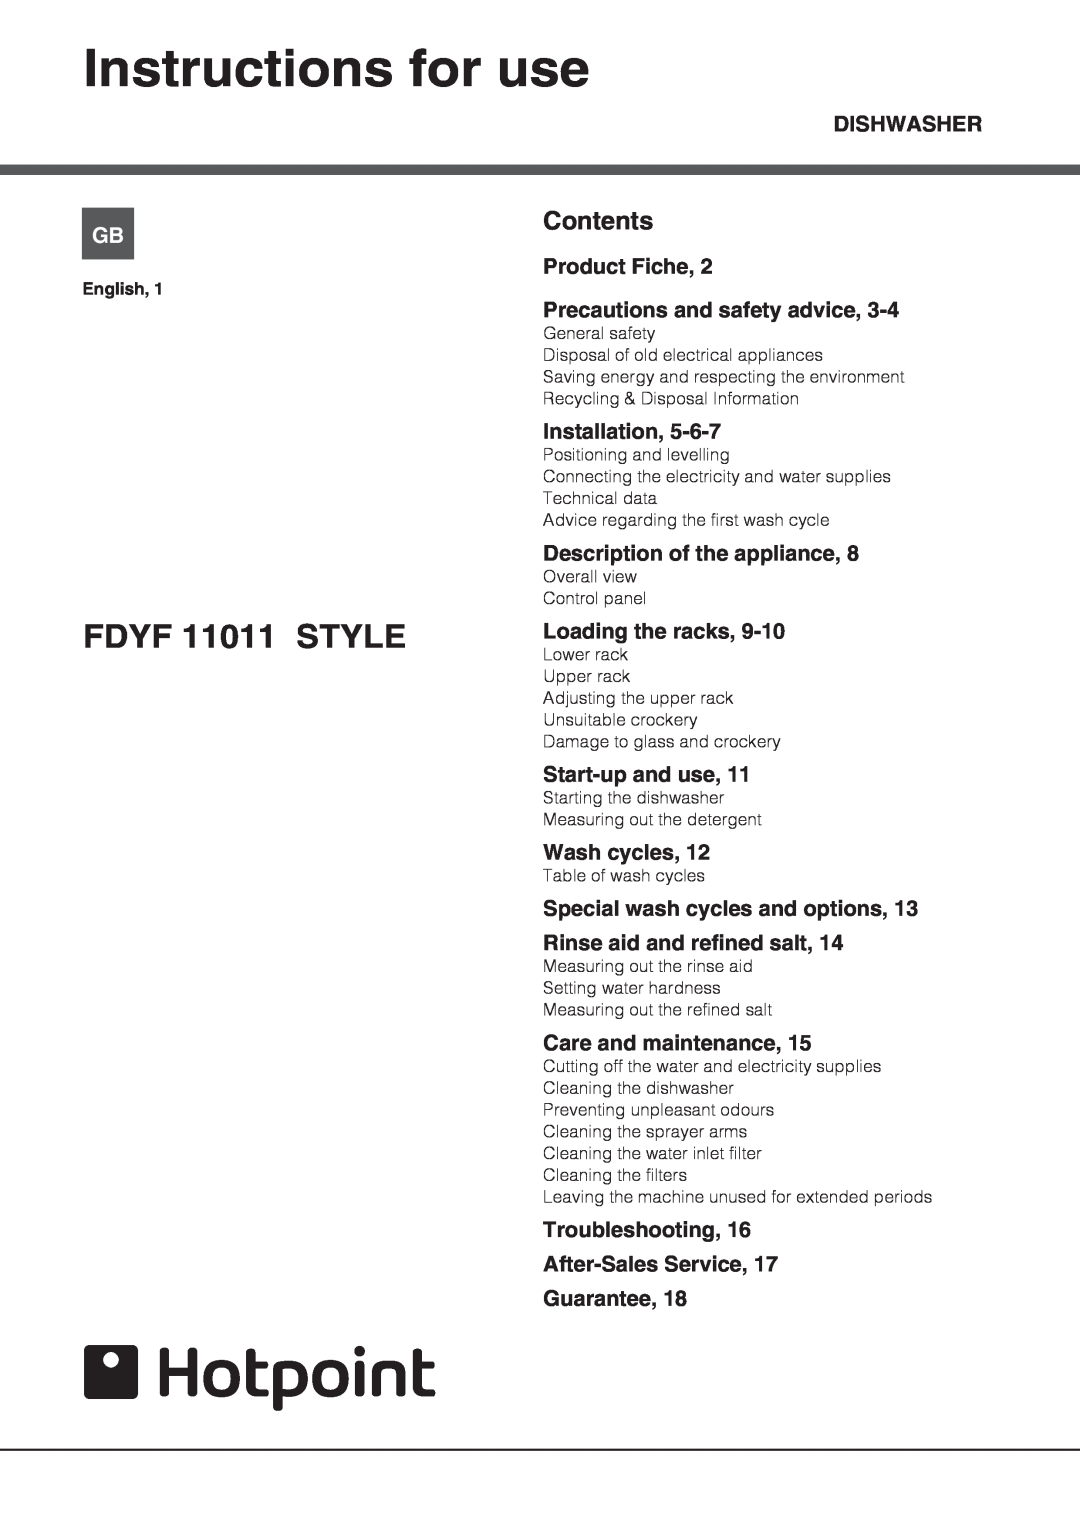 Hotpoint manual Instructions for use, FDYF 11011 STYLE, Contents 